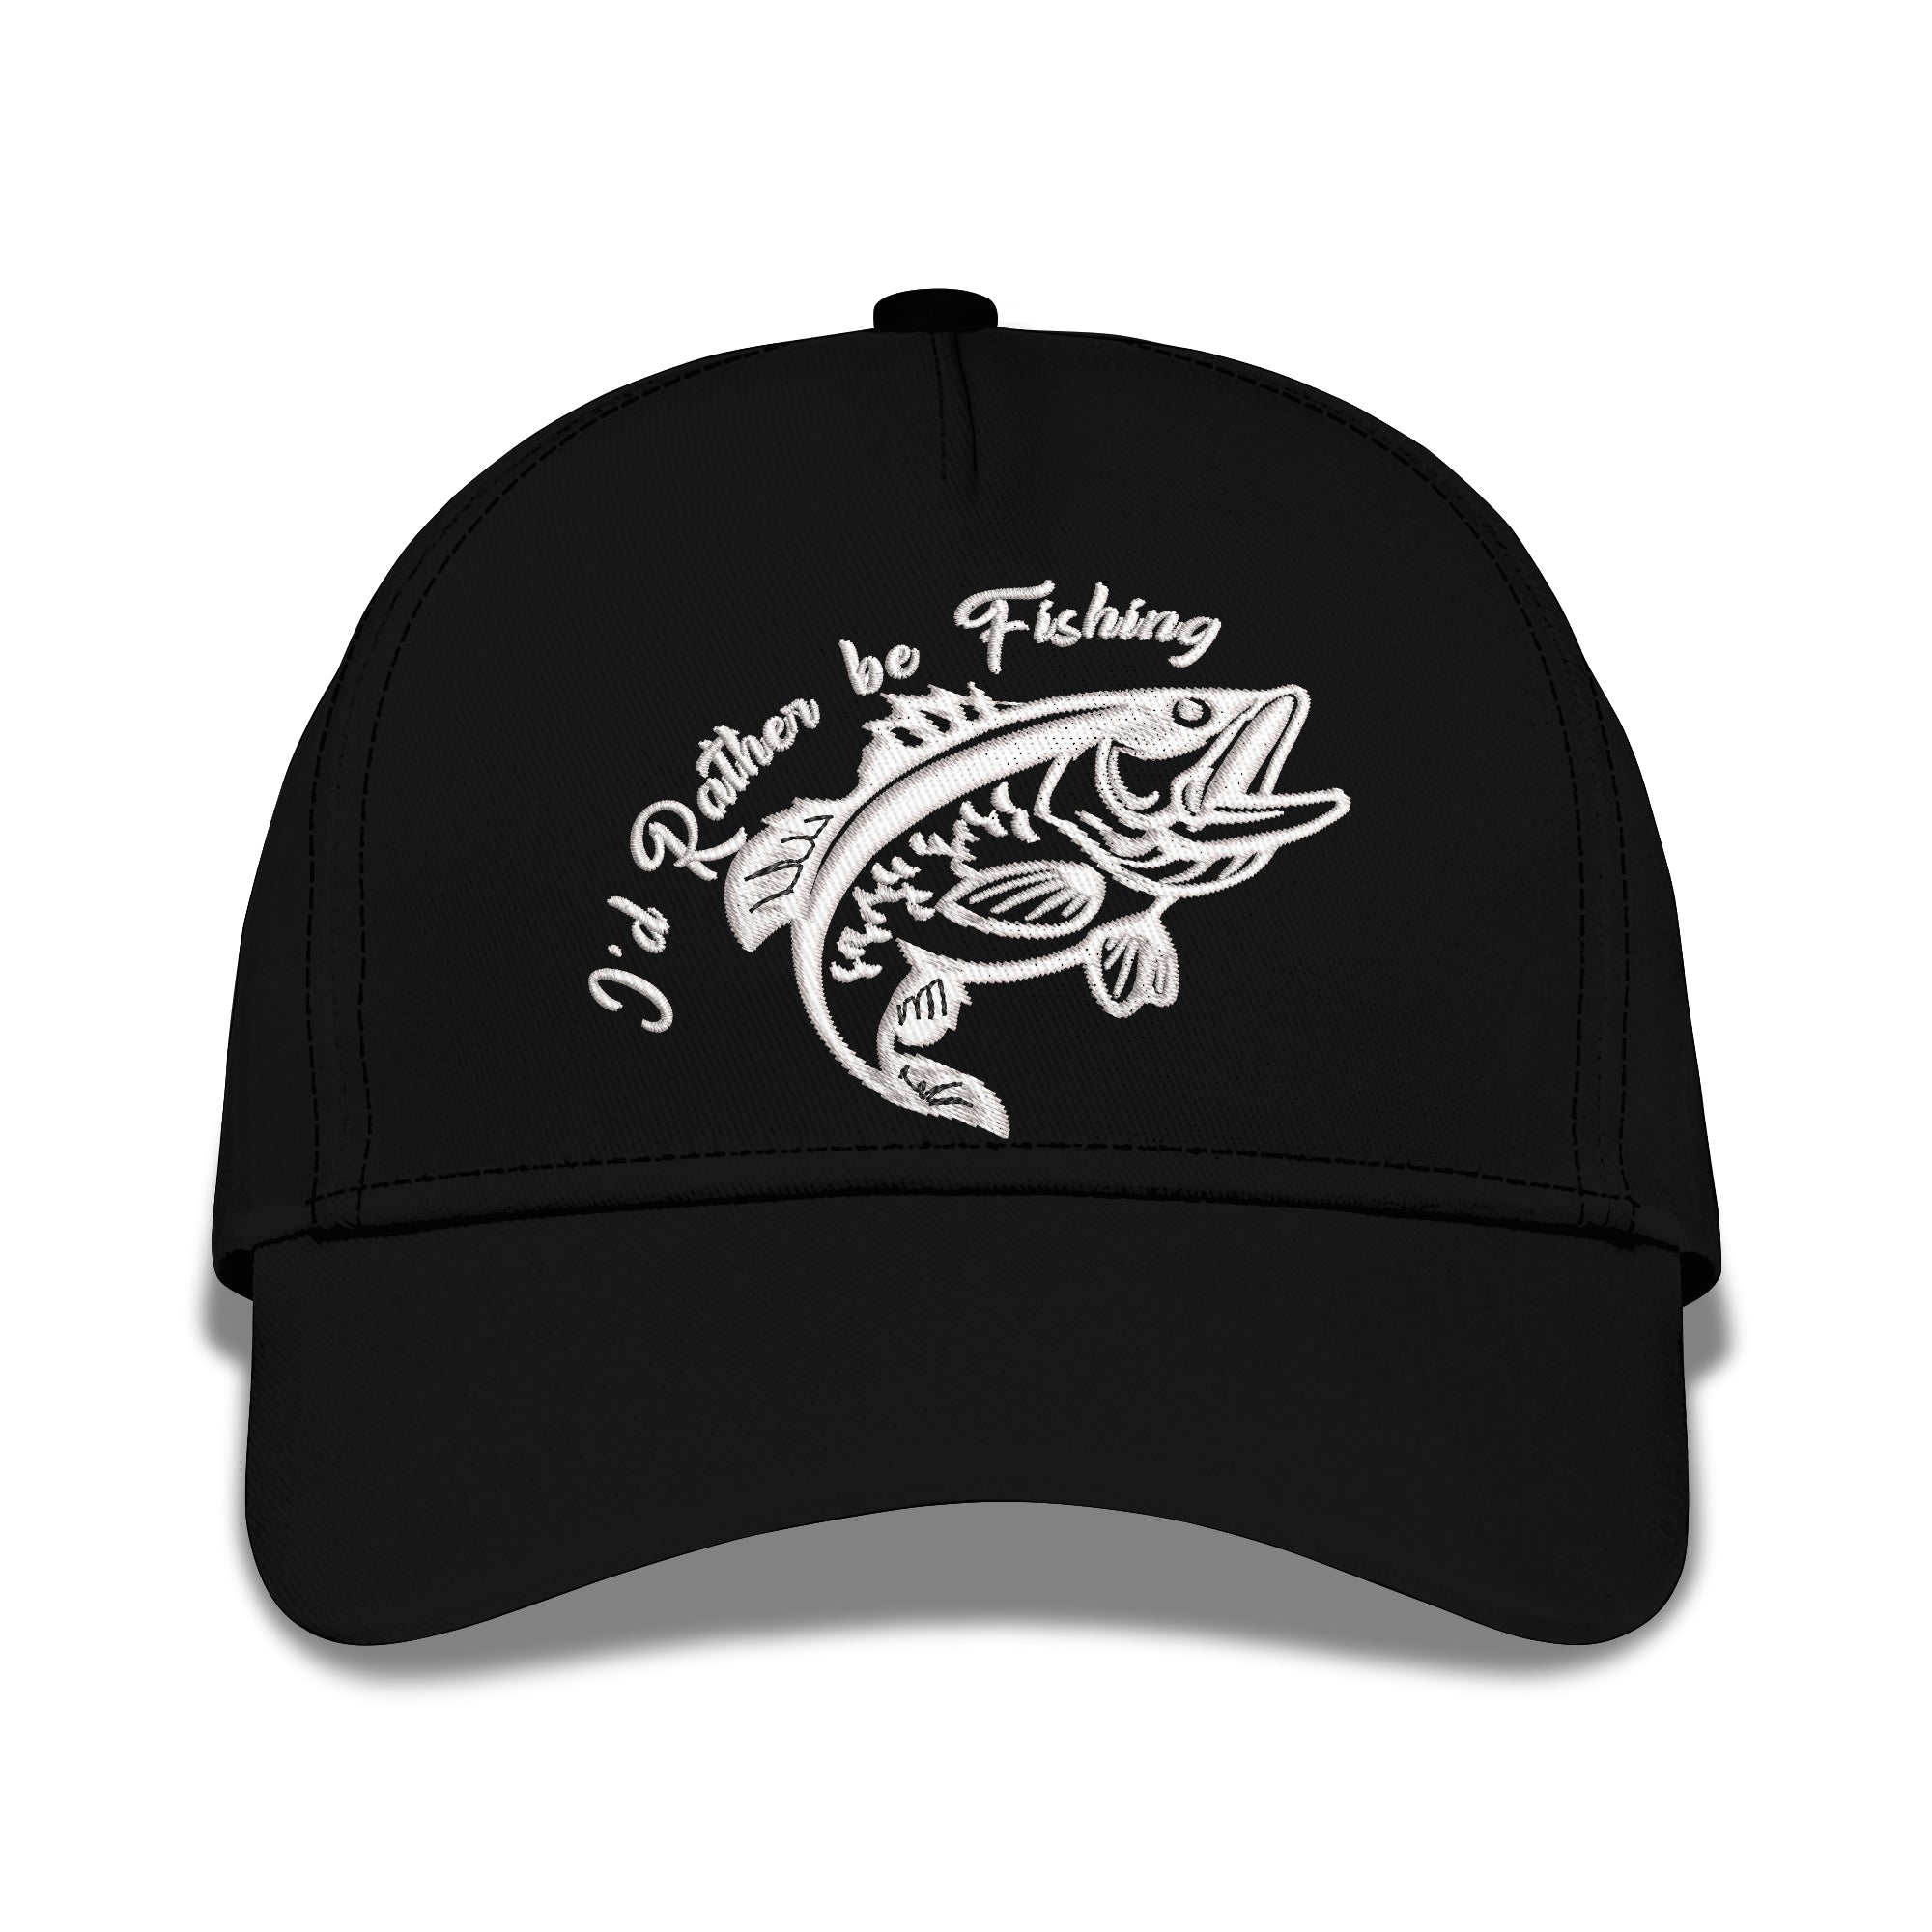 I'd Rather Be Fishing Embroidered Baseball Caps